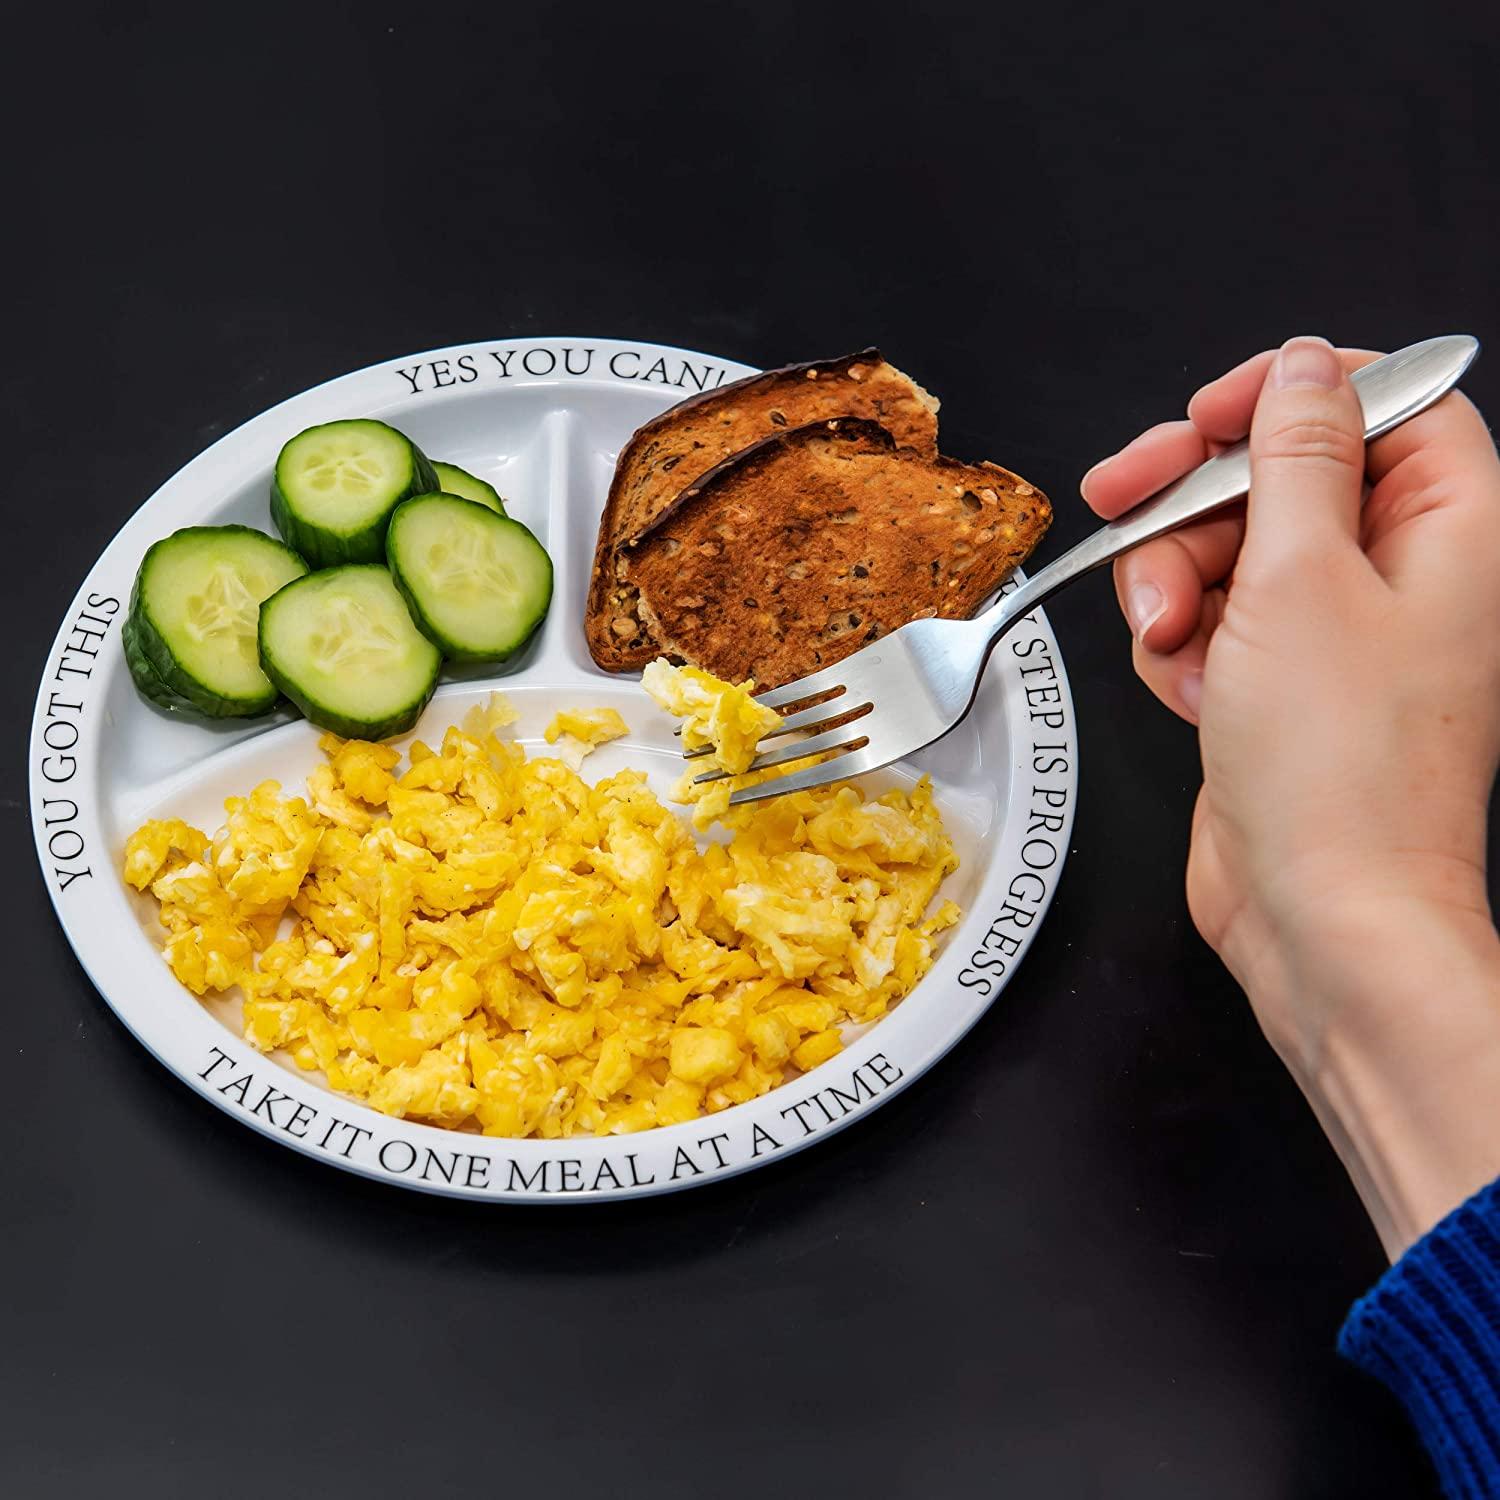 portion control plate<br>portion plate<br>portion food plate<br>food portion plates<br>adult portion plate<br>portion bowls<br>portion size plates<br>portion plates for weight loss<br>plate portion for weight loss<br>portion control <a href=